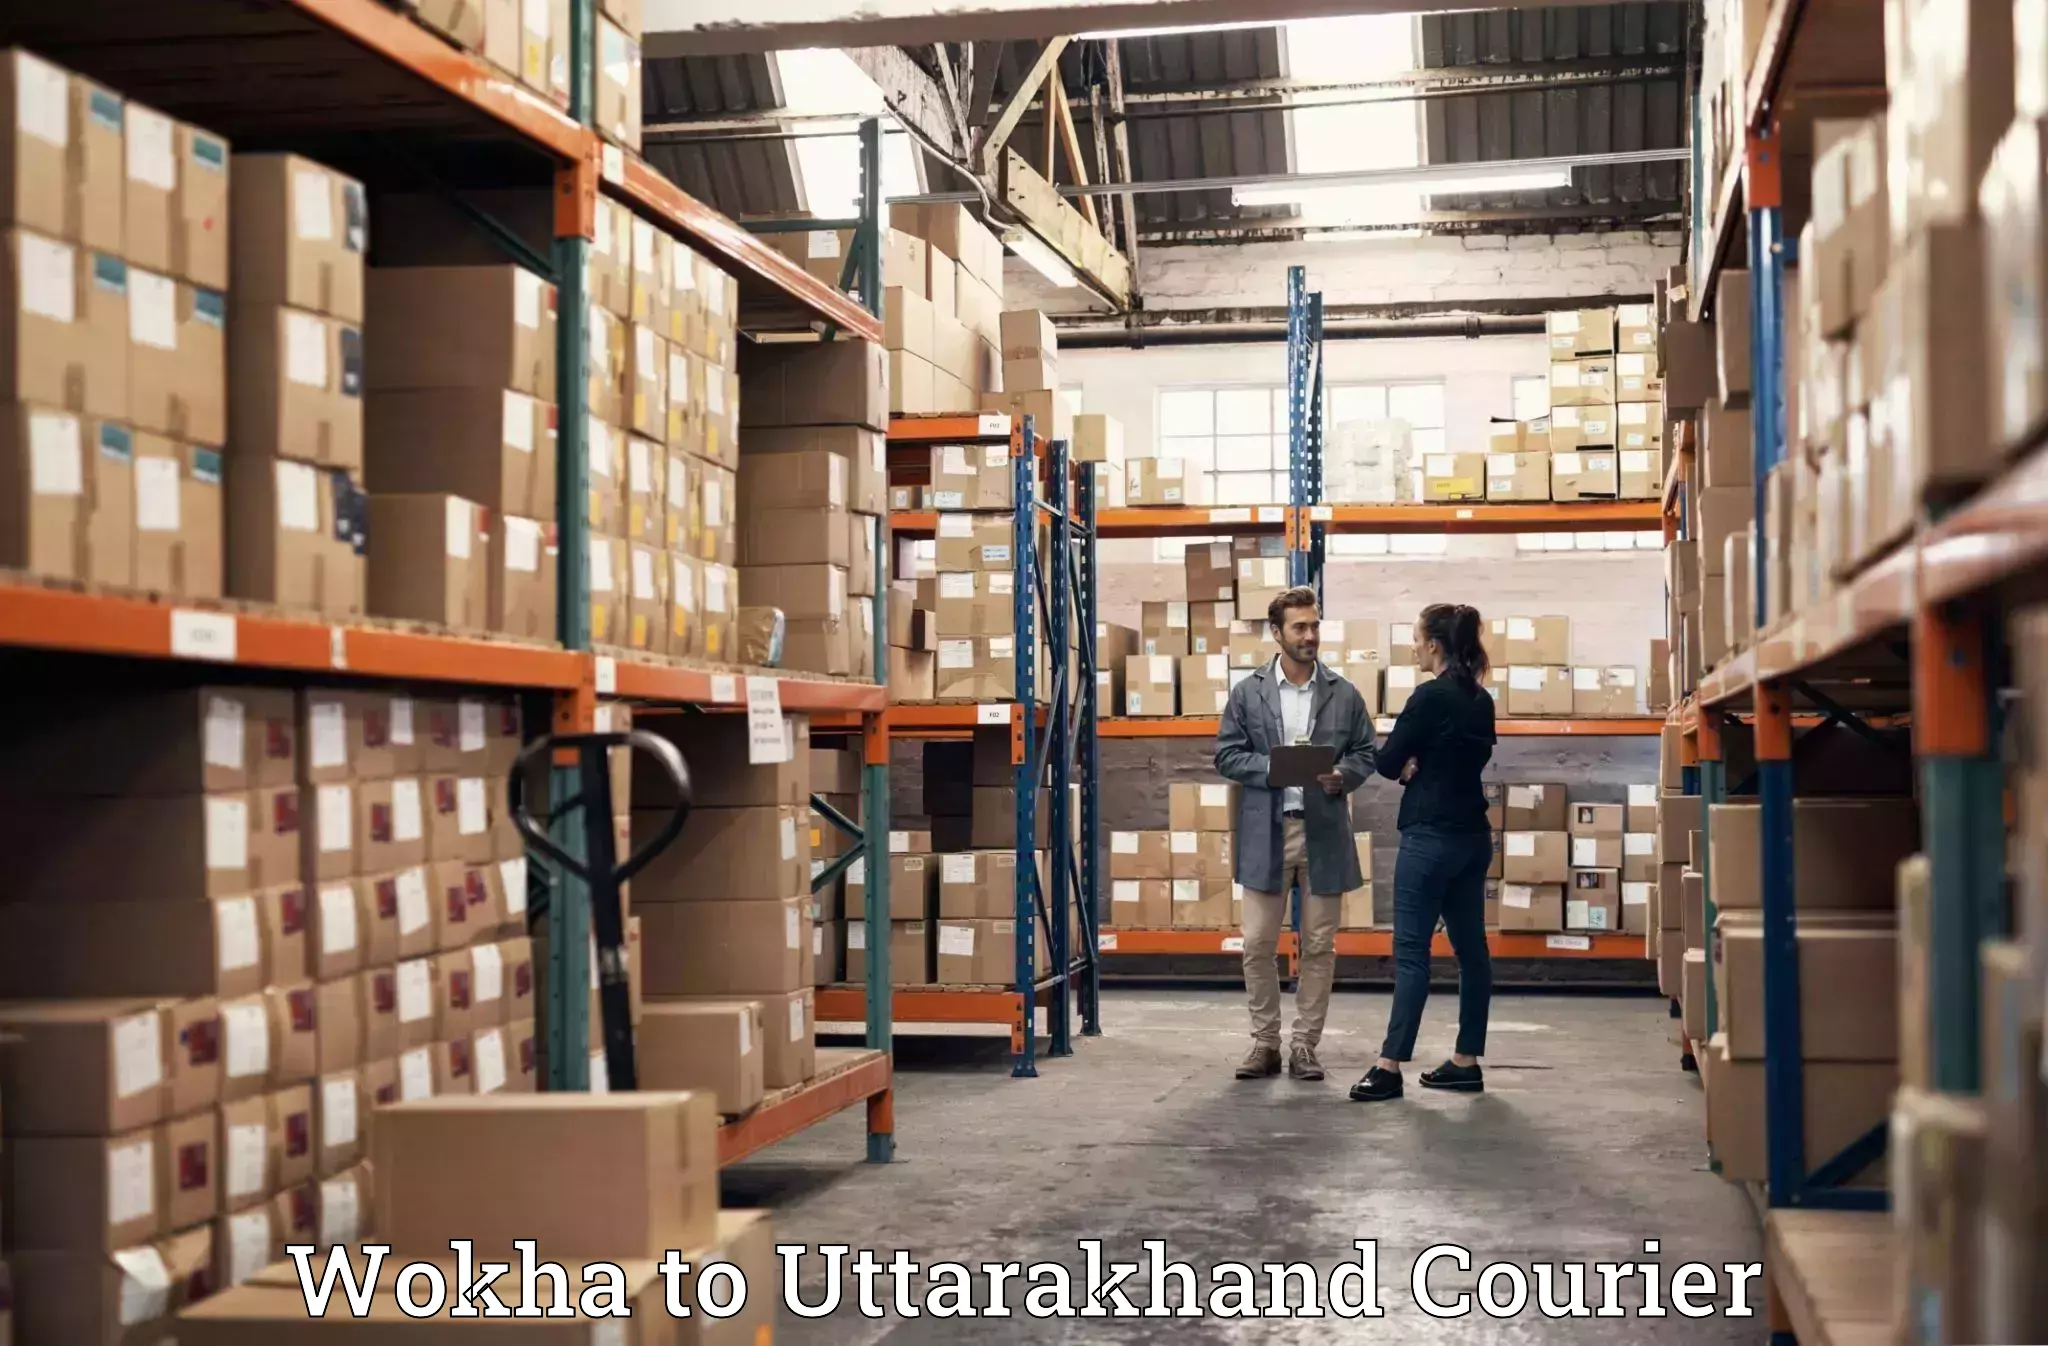 Trusted relocation services in Wokha to Rishikesh